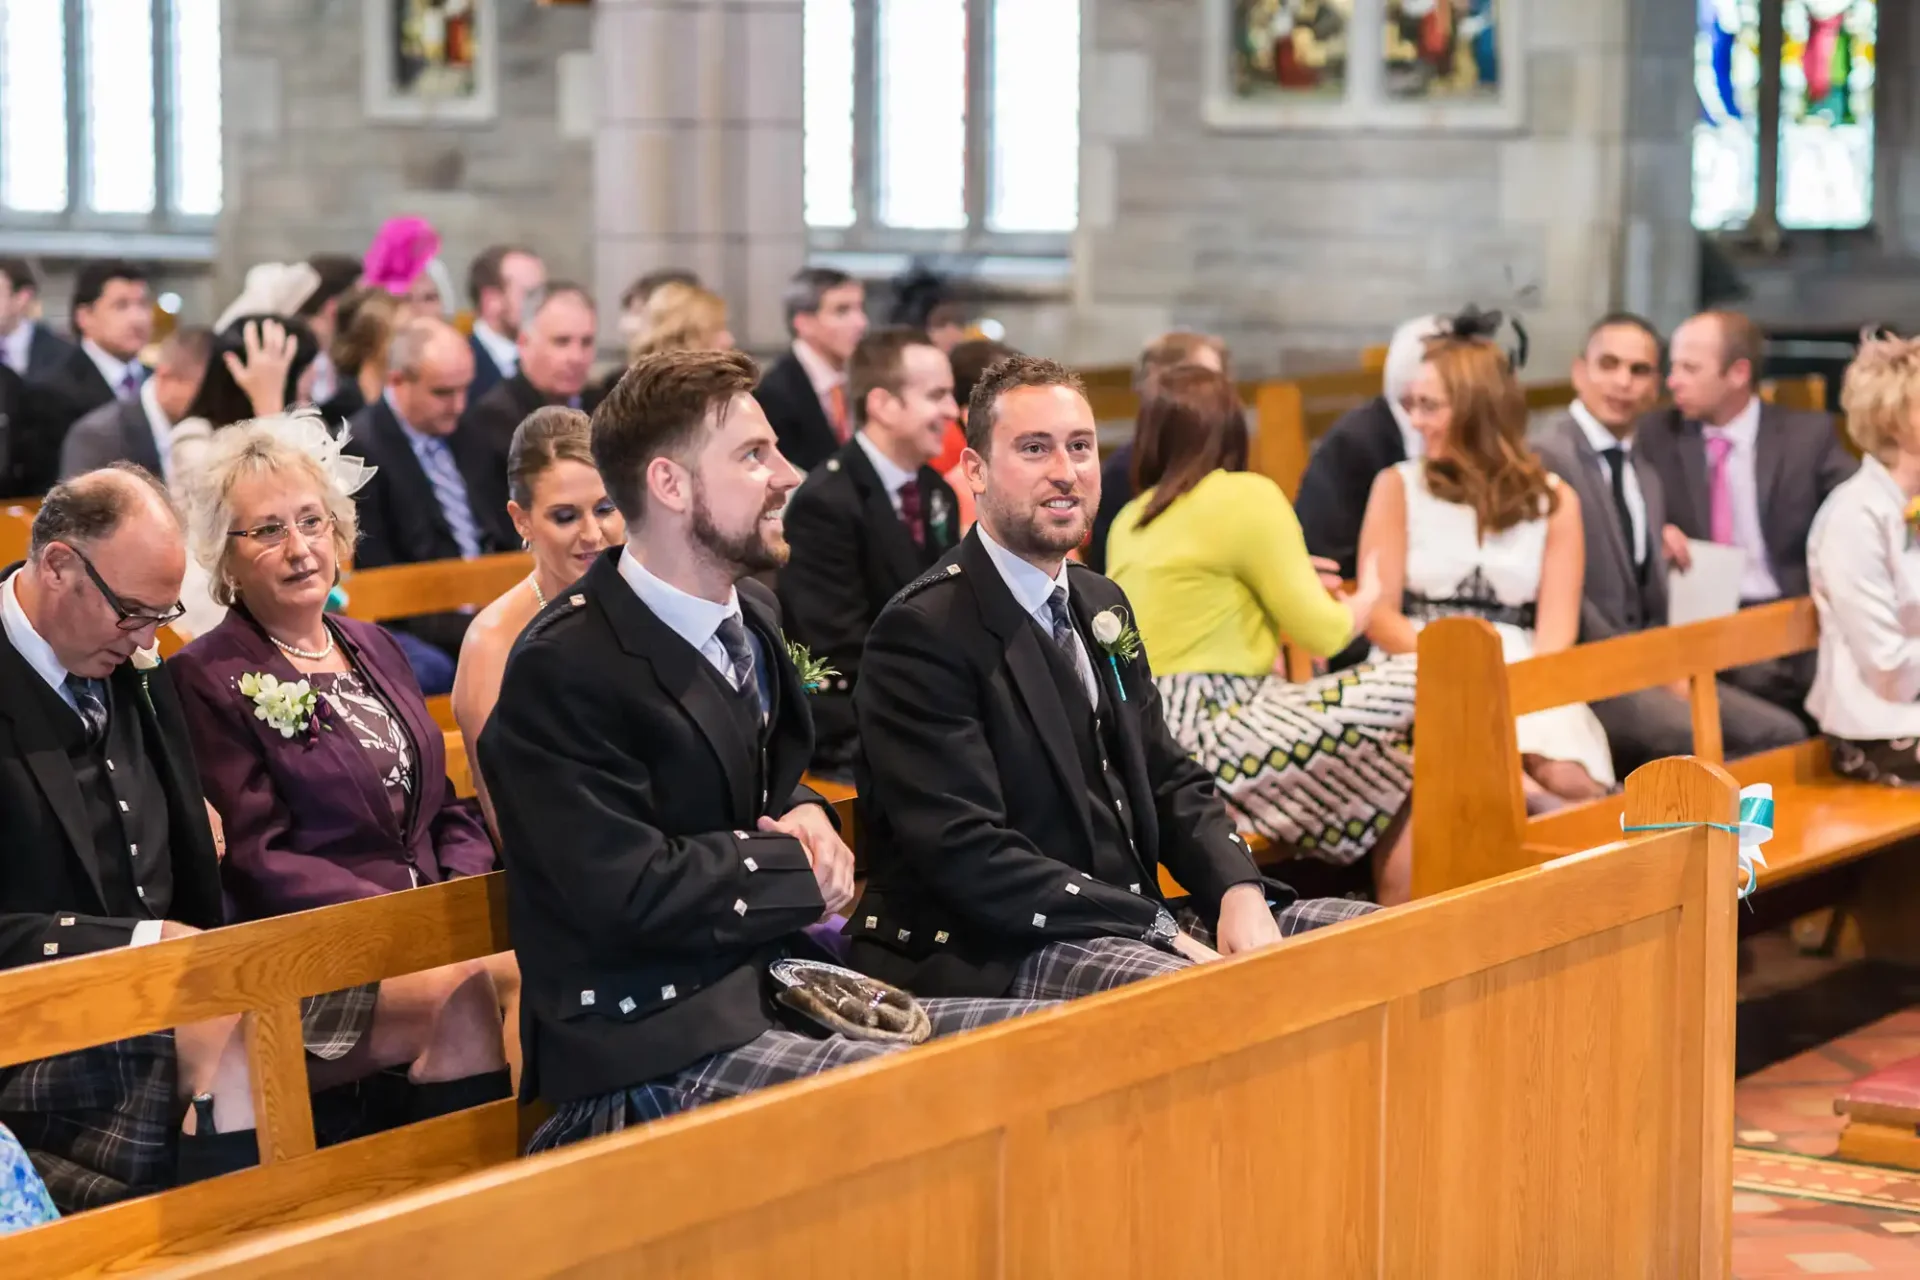 Two men wearing traditional kilts sitting in a church pew during a wedding ceremony, surrounded by other guests.